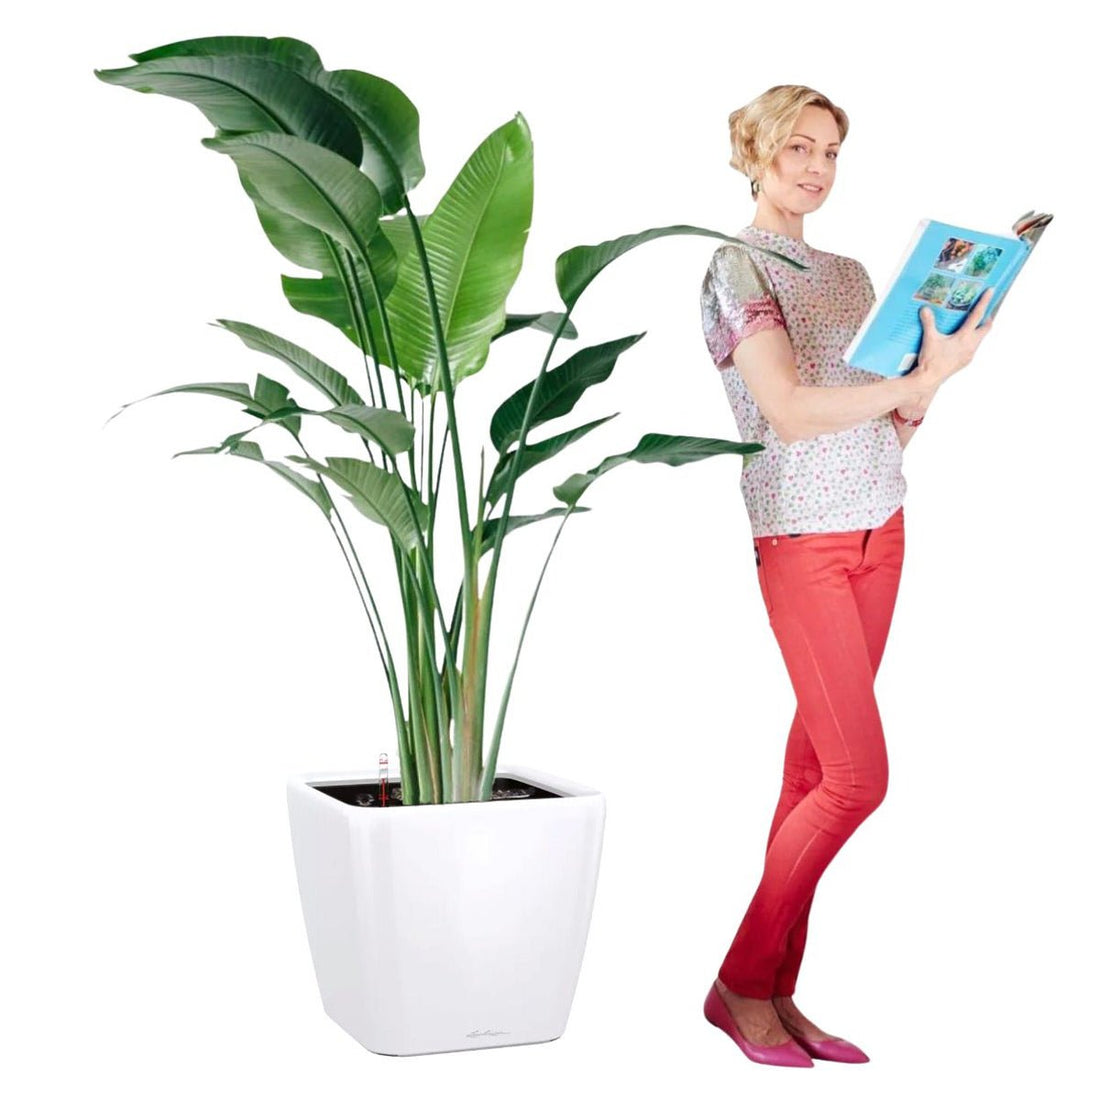 XL Bird of Paradise Plant Potted In Lechuza Quadro 50 Planter - White - My City Plants